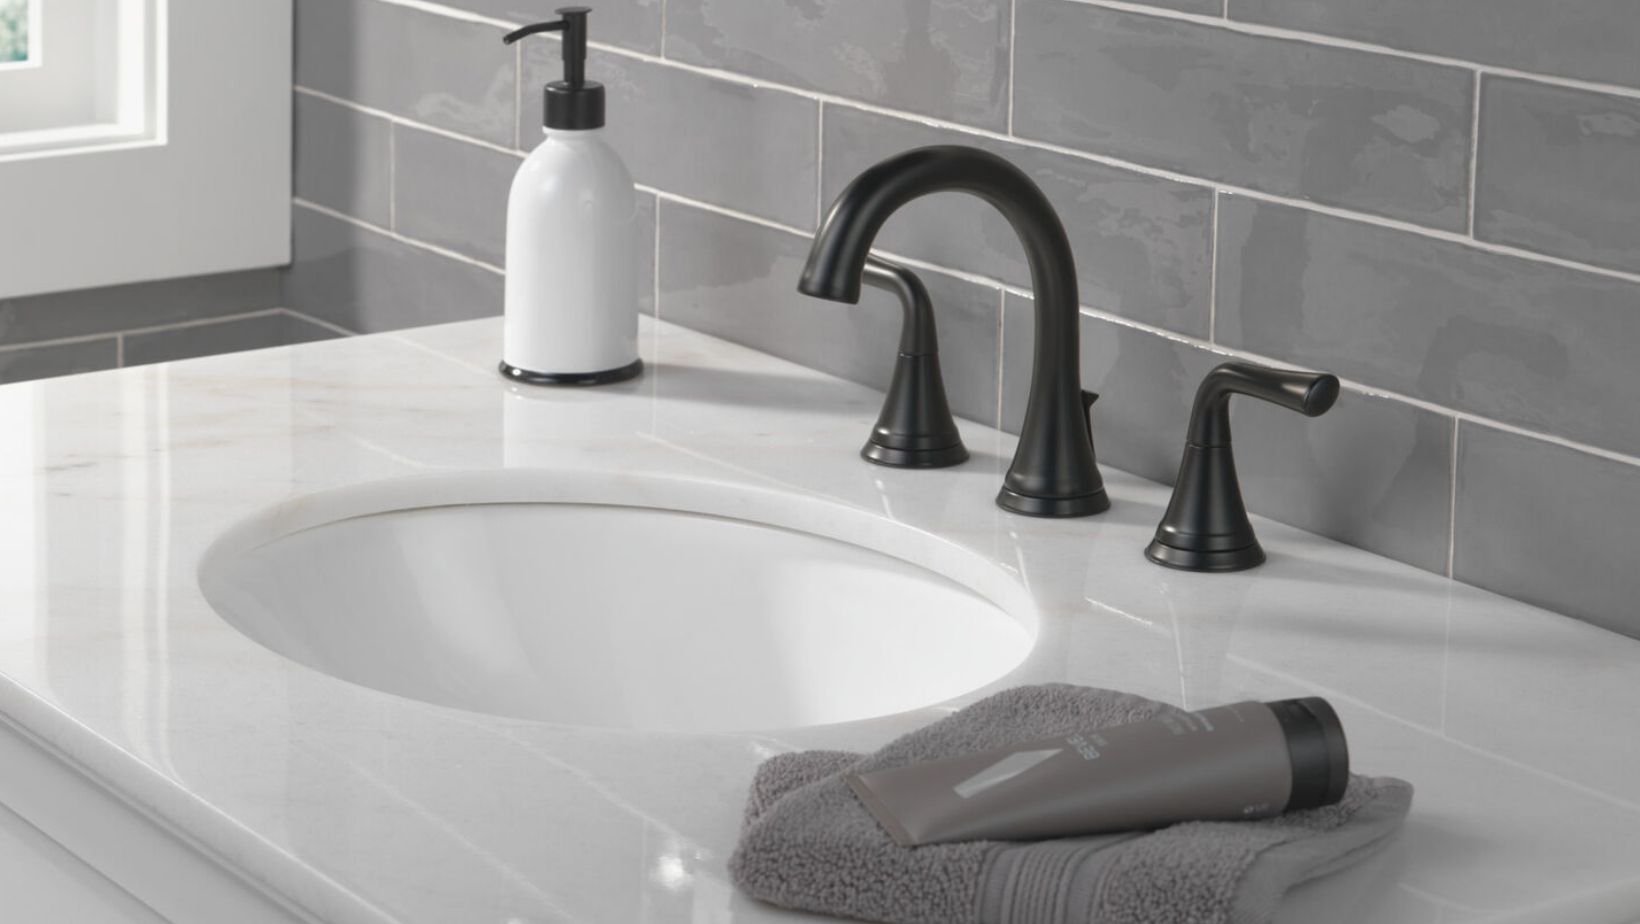 How to Install a Matte Black Widespread Bathroom Sink Faucet: Step Wise Guide